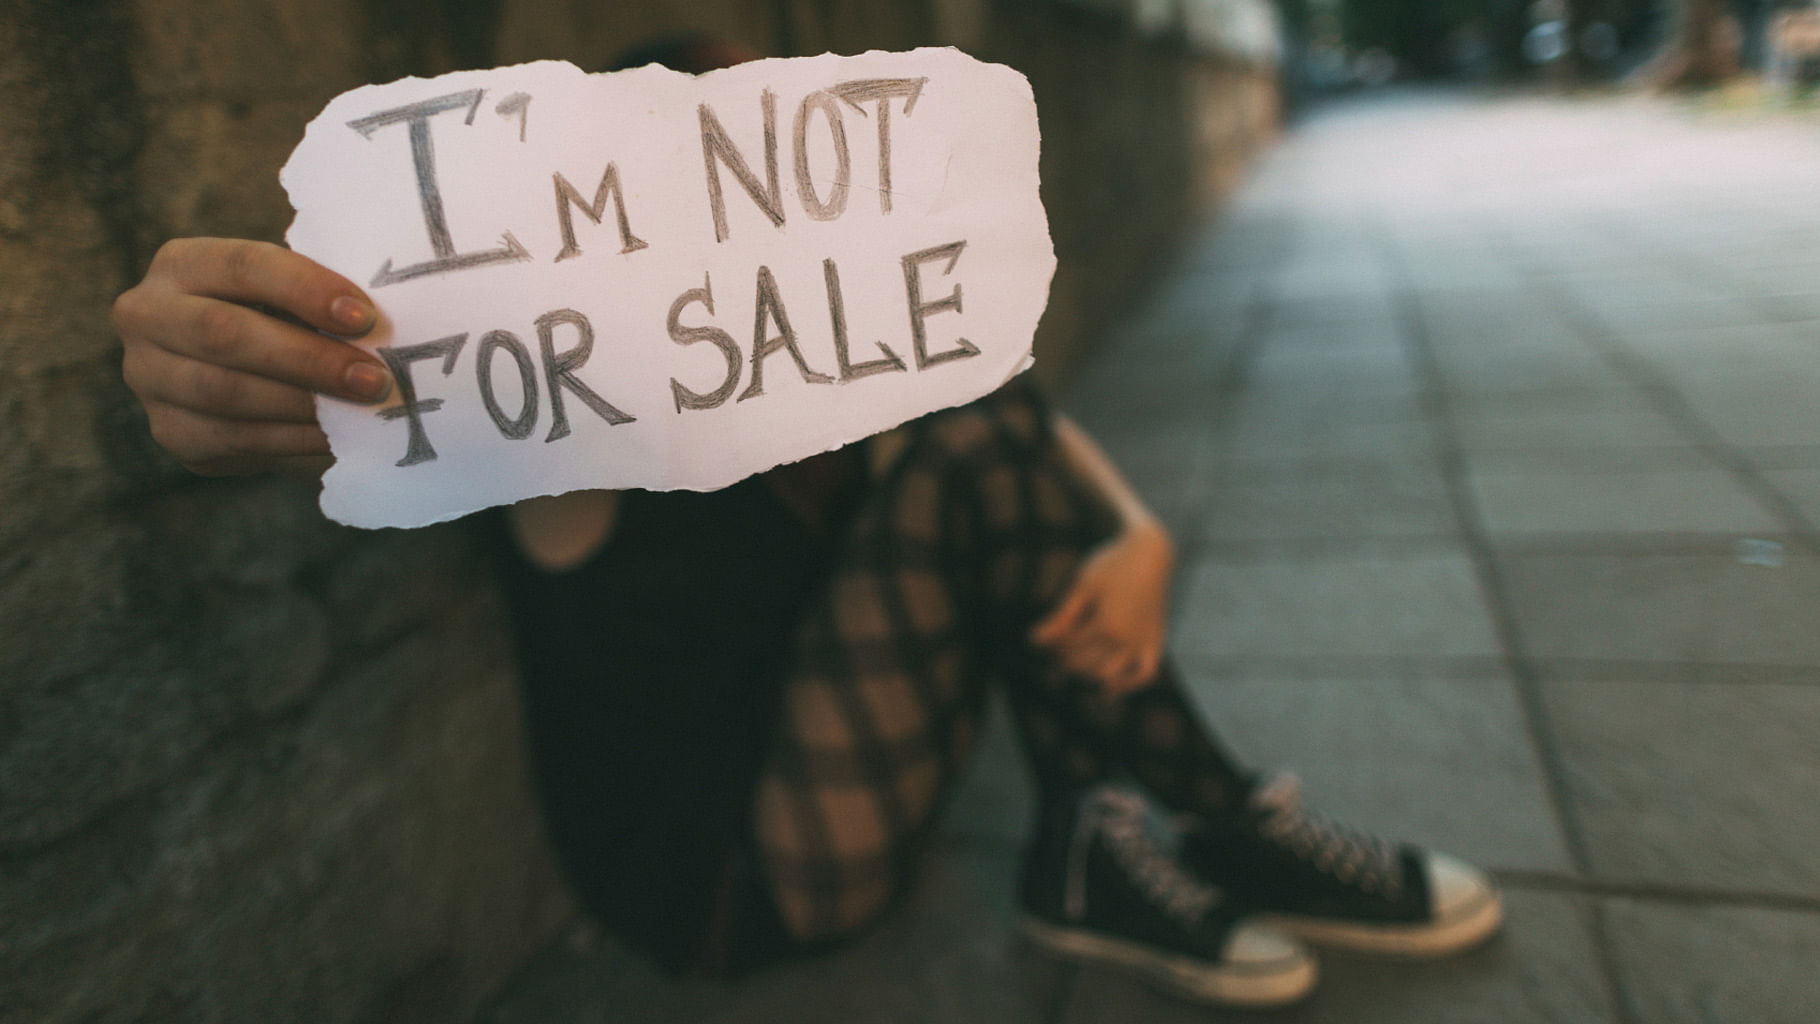 Approximately 16 million girl children are believed to have been trafficked into the sex trade. Photo used for representational purpose only. (Photo: iStockphoto)